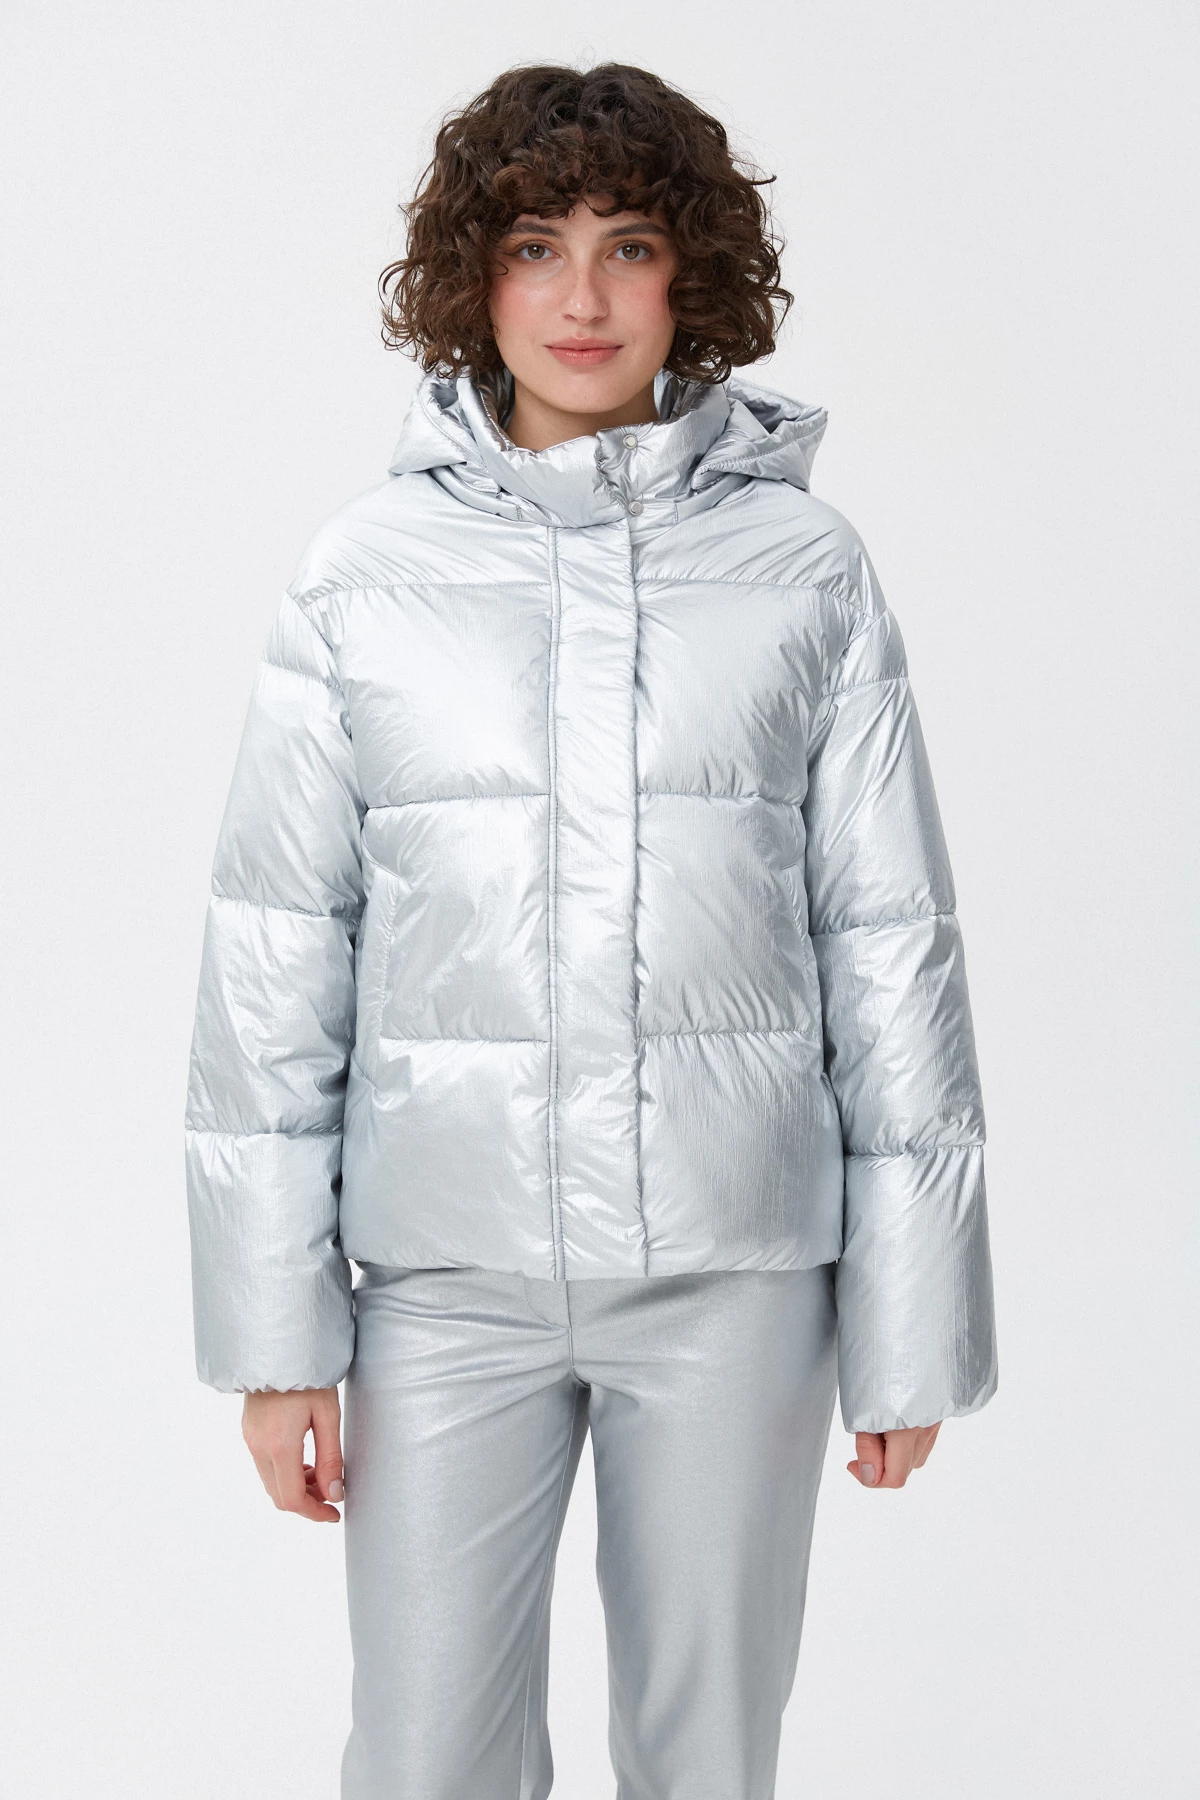 Metalic cropped puffer jacket with insulation, photo 4